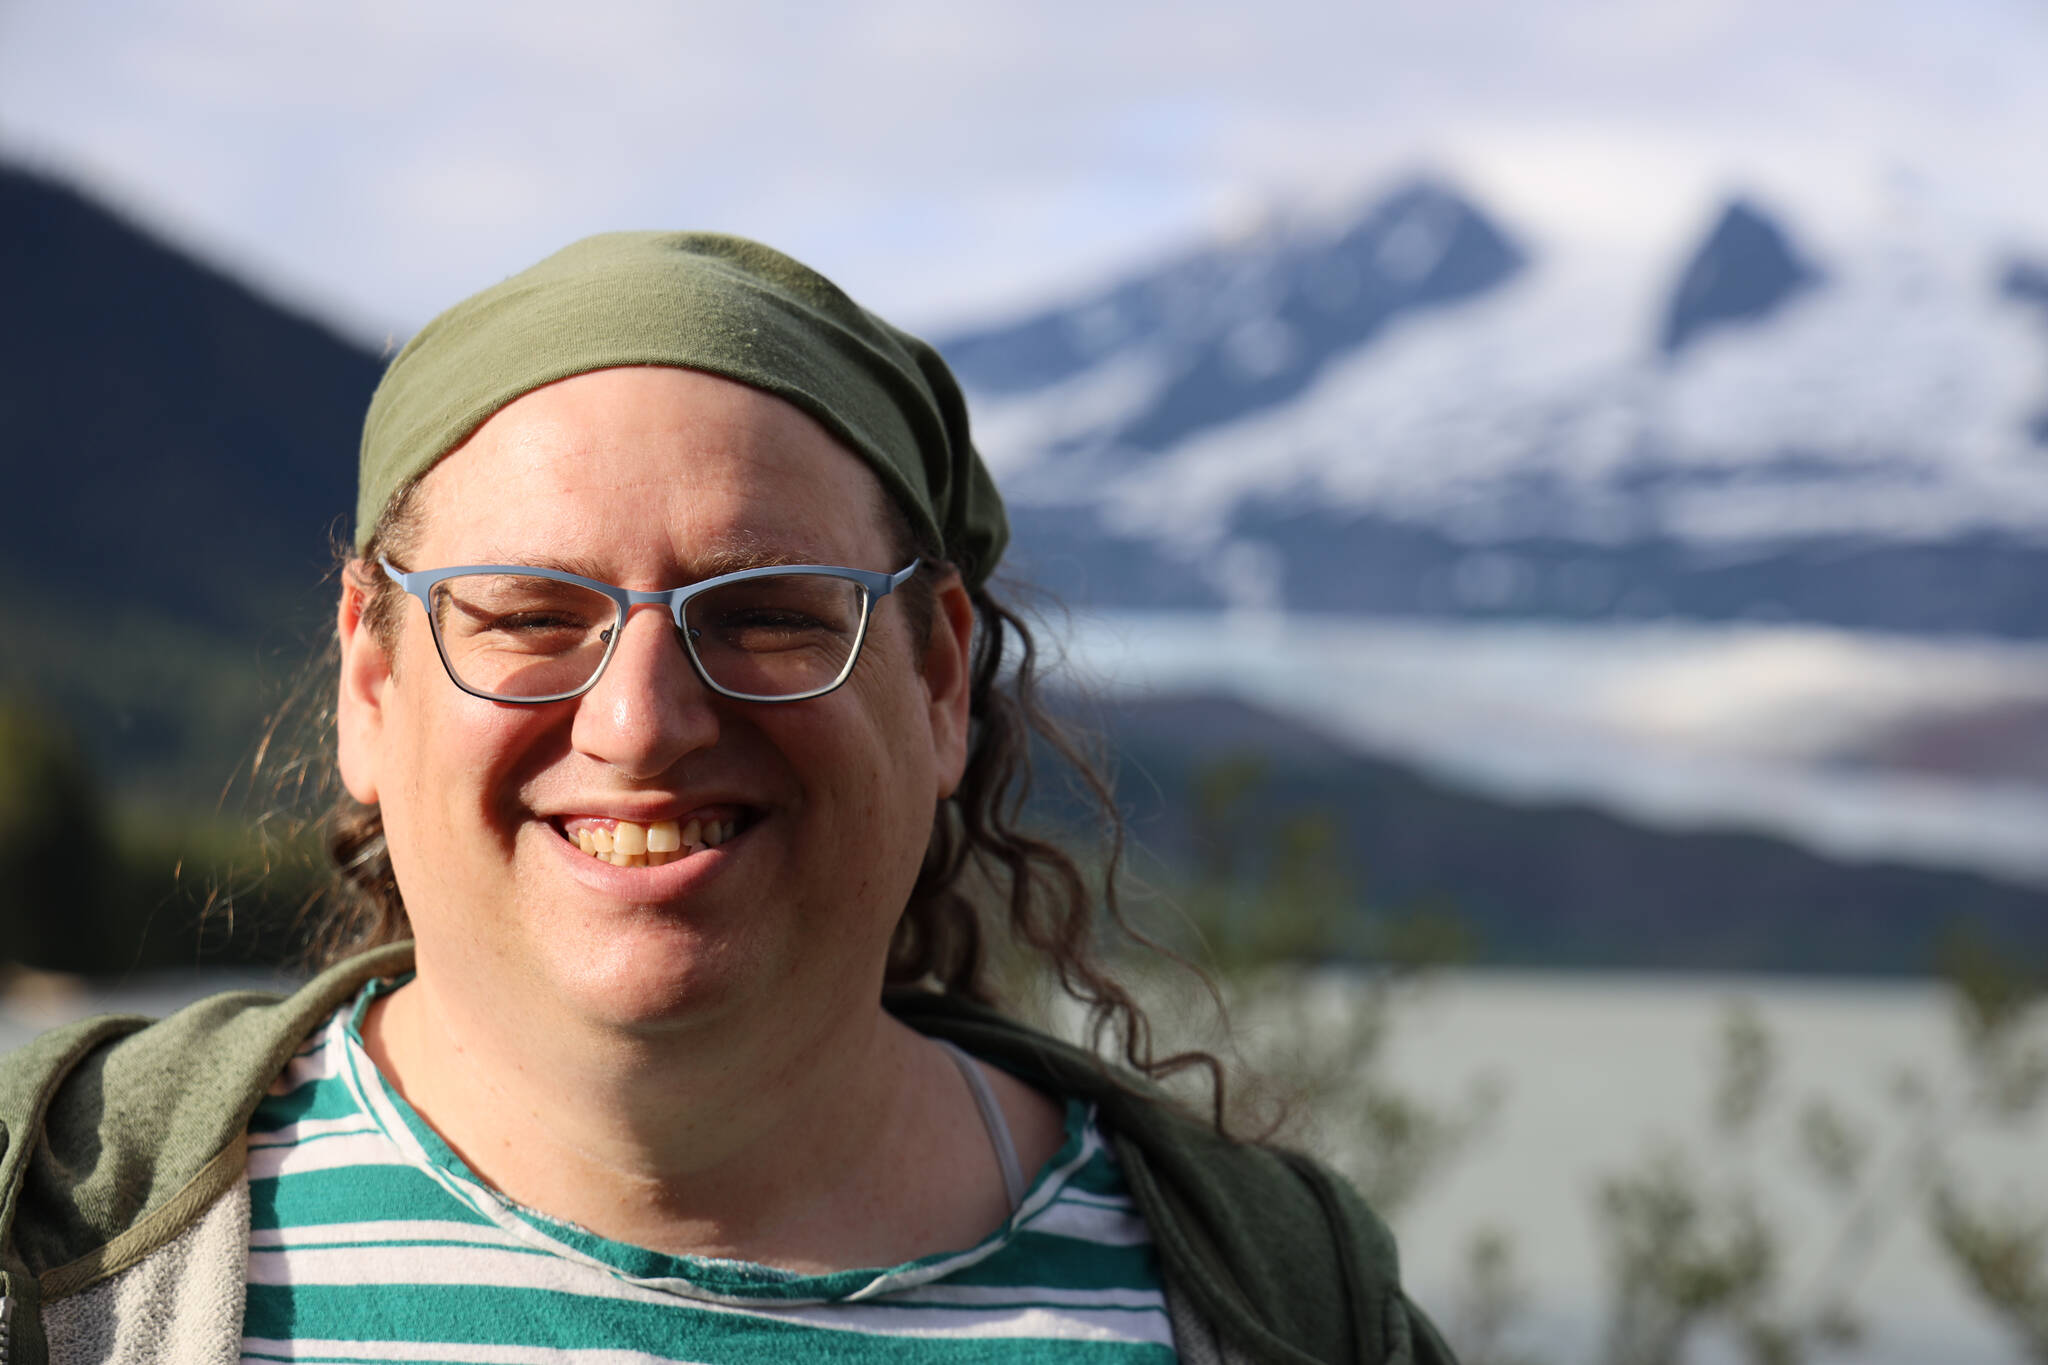 Emily Mesch, president of Southeast Alaska LGBTQ+ Alliance, smiles for a photo near the Mendenhall Glacier Thursday evening. SEAGLA is a Juneau-based nonprofit that works to “provide a supporting social network for gay, lesbian, bisexual, transgender, and queer people in Southeast Alaska.” (Clarise Larson / Juneau Empire)